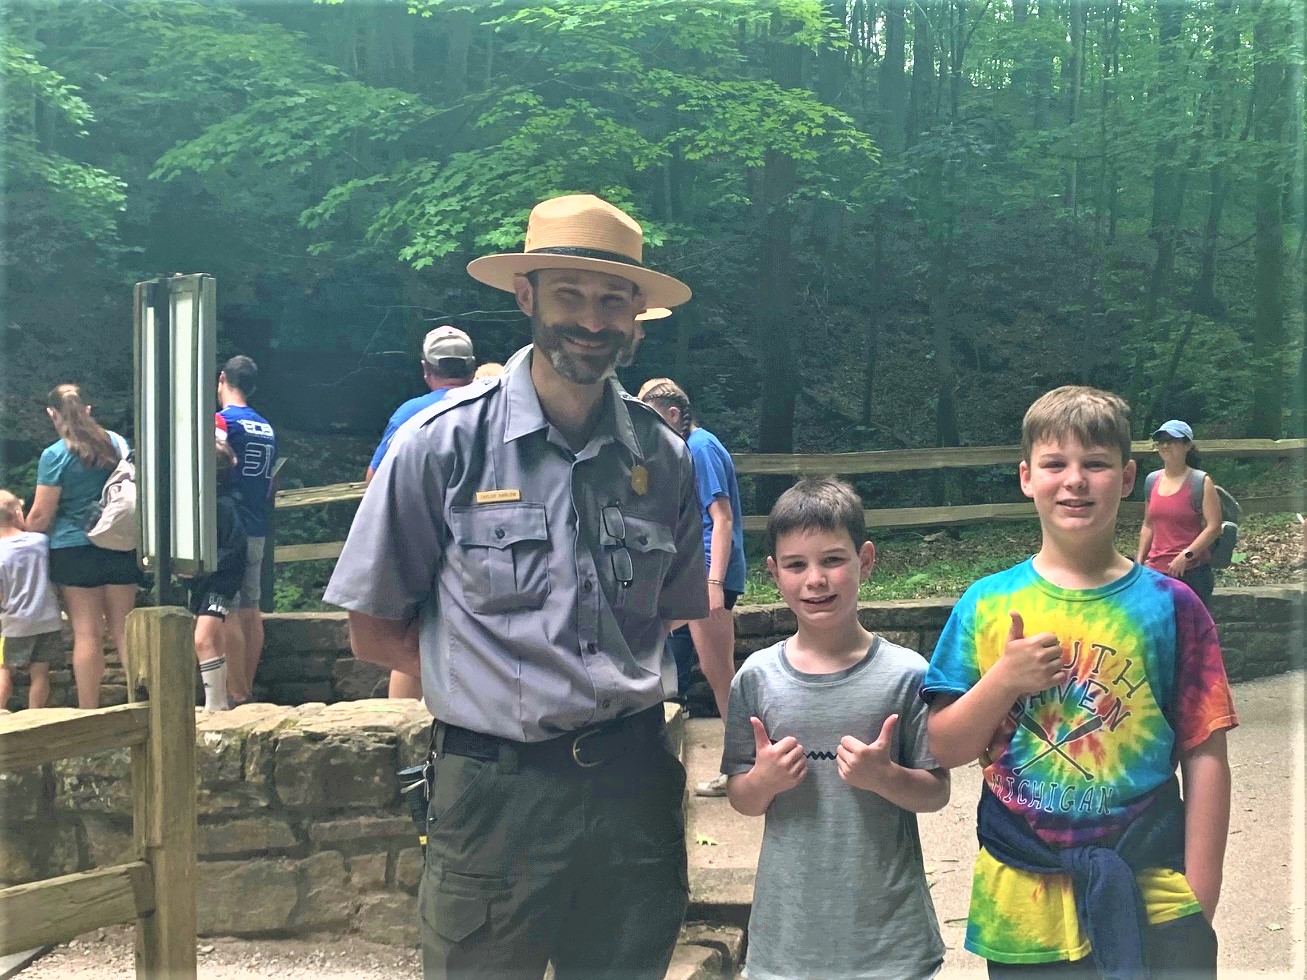 Ranger standing outside Mammoth Cave Historic Tour with our grandsons. Boys have thumbs up